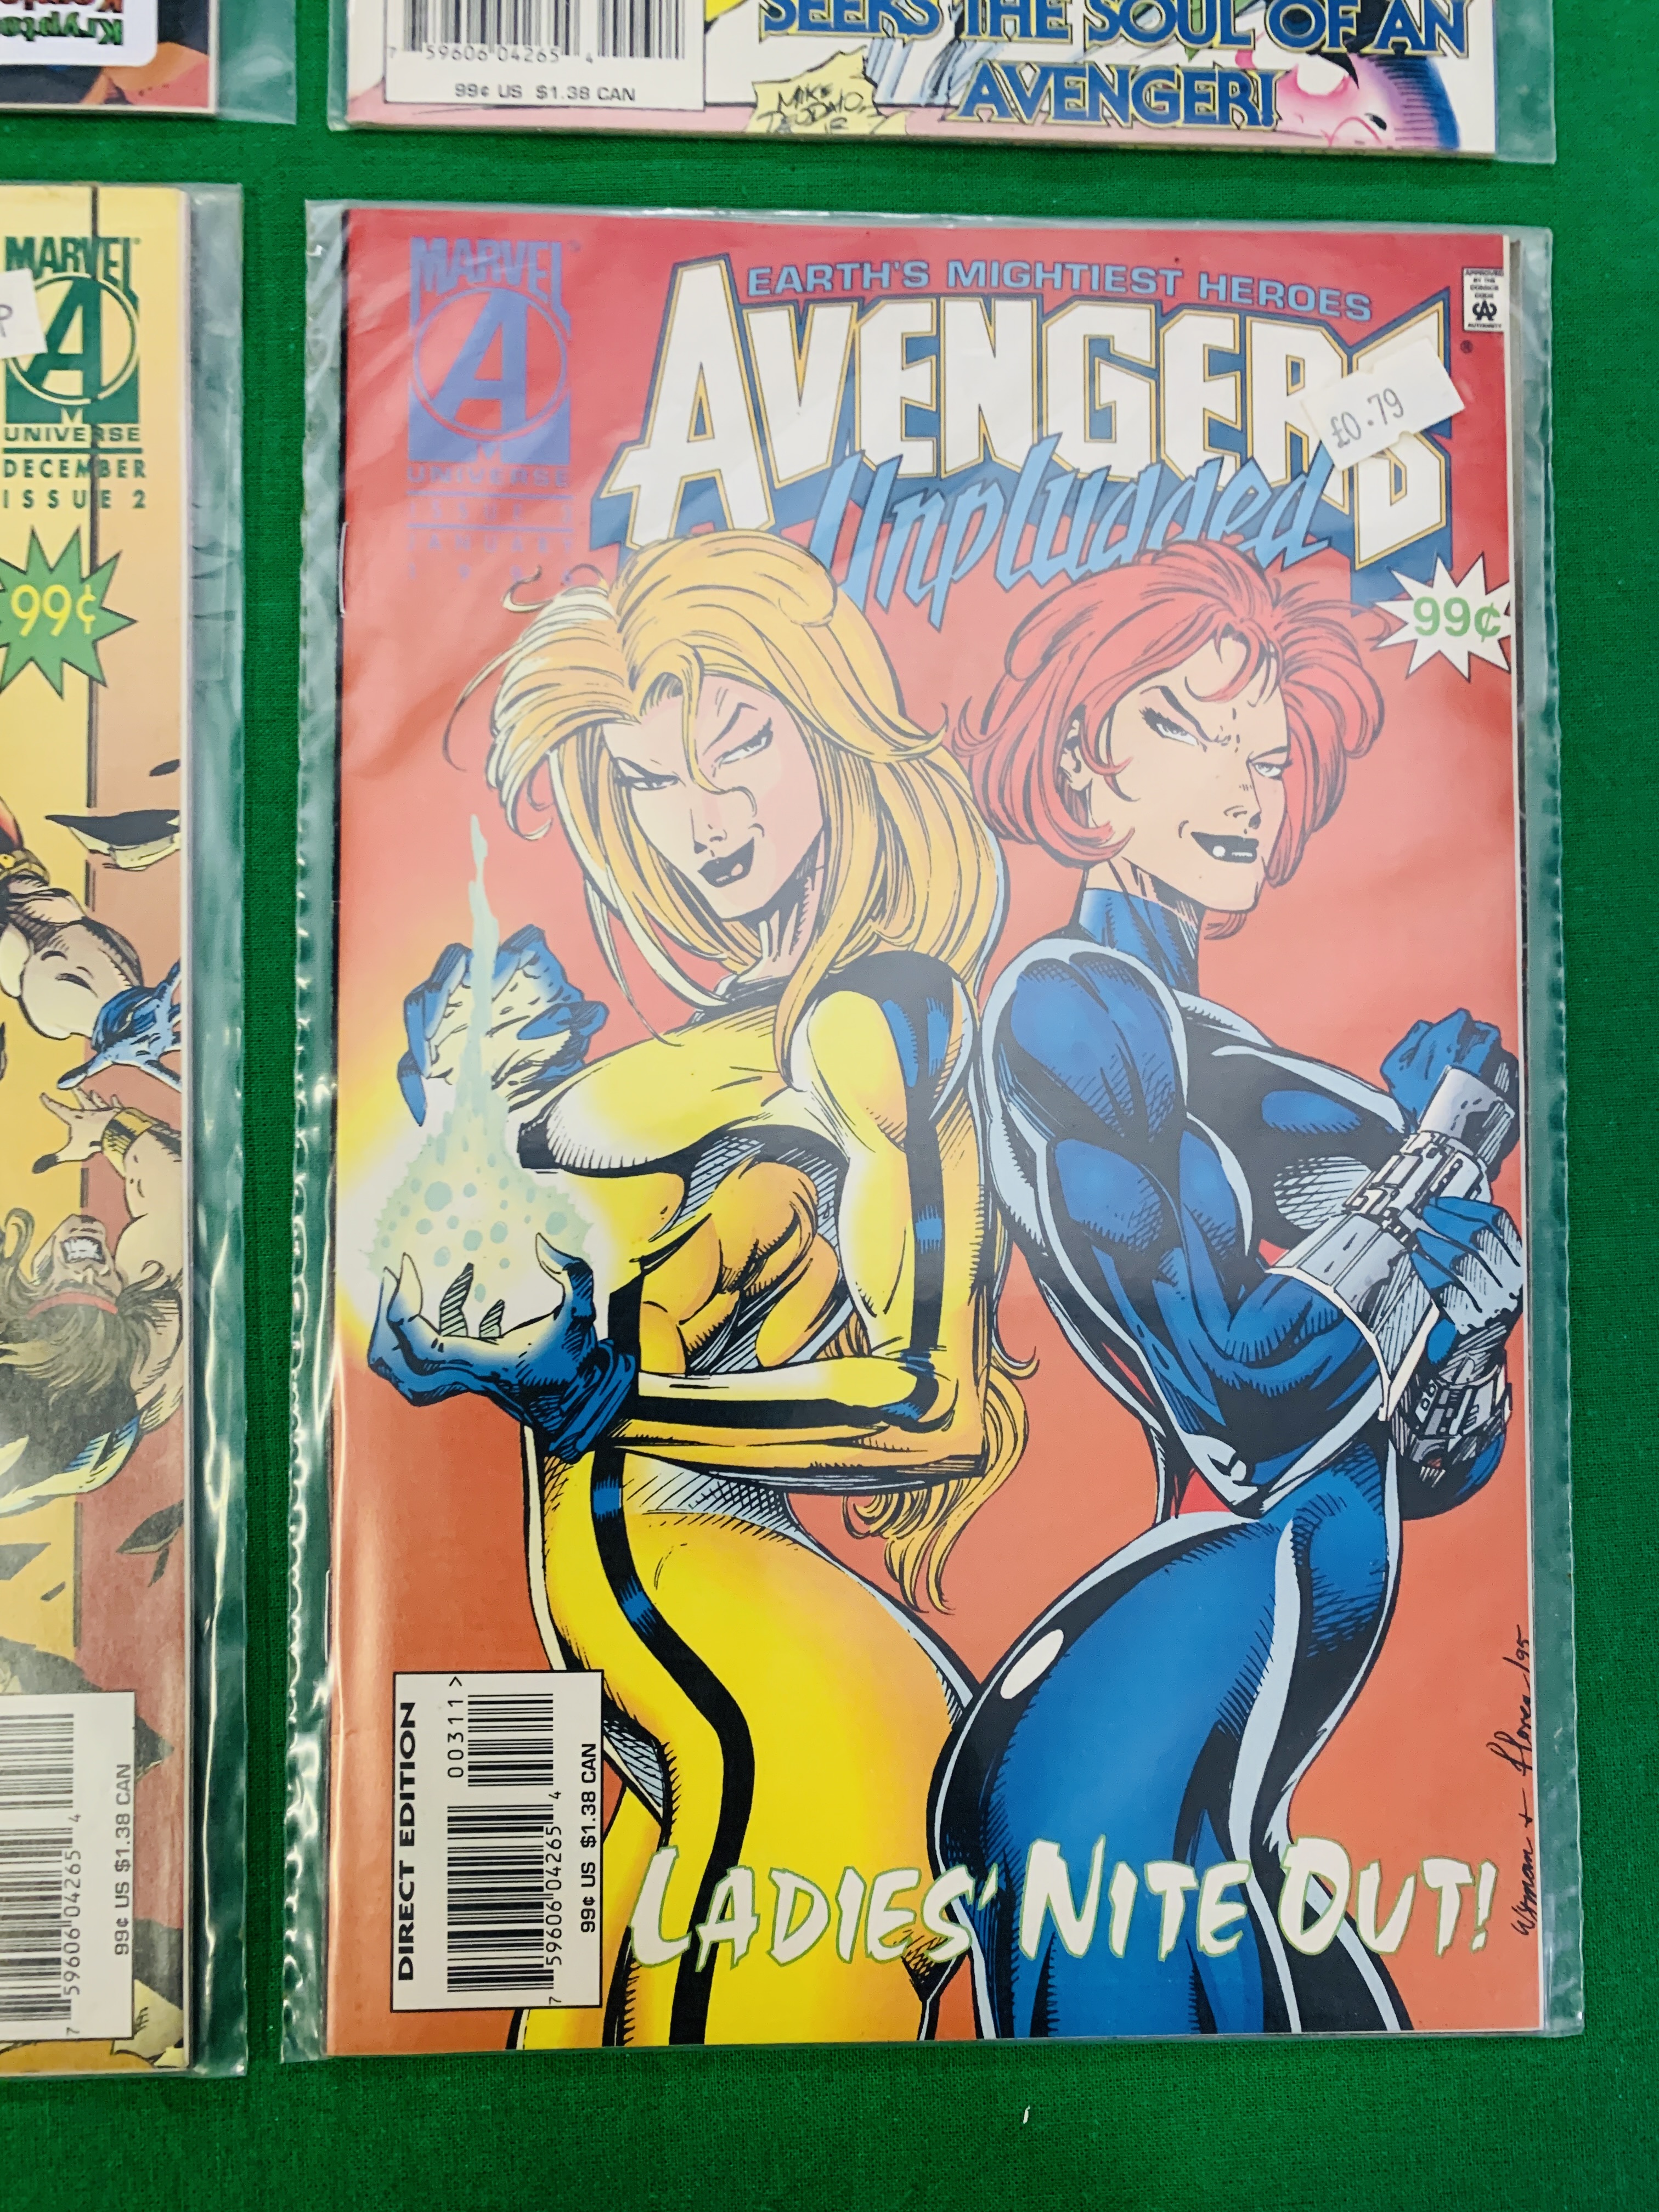 MARVEL COMICS THE AVENGERS UNPLUGGED NO. 1 - 6 FROM 1996, FIRST APPEARANCE NO. 5. MONICA RAMBEAU. - Image 4 of 7